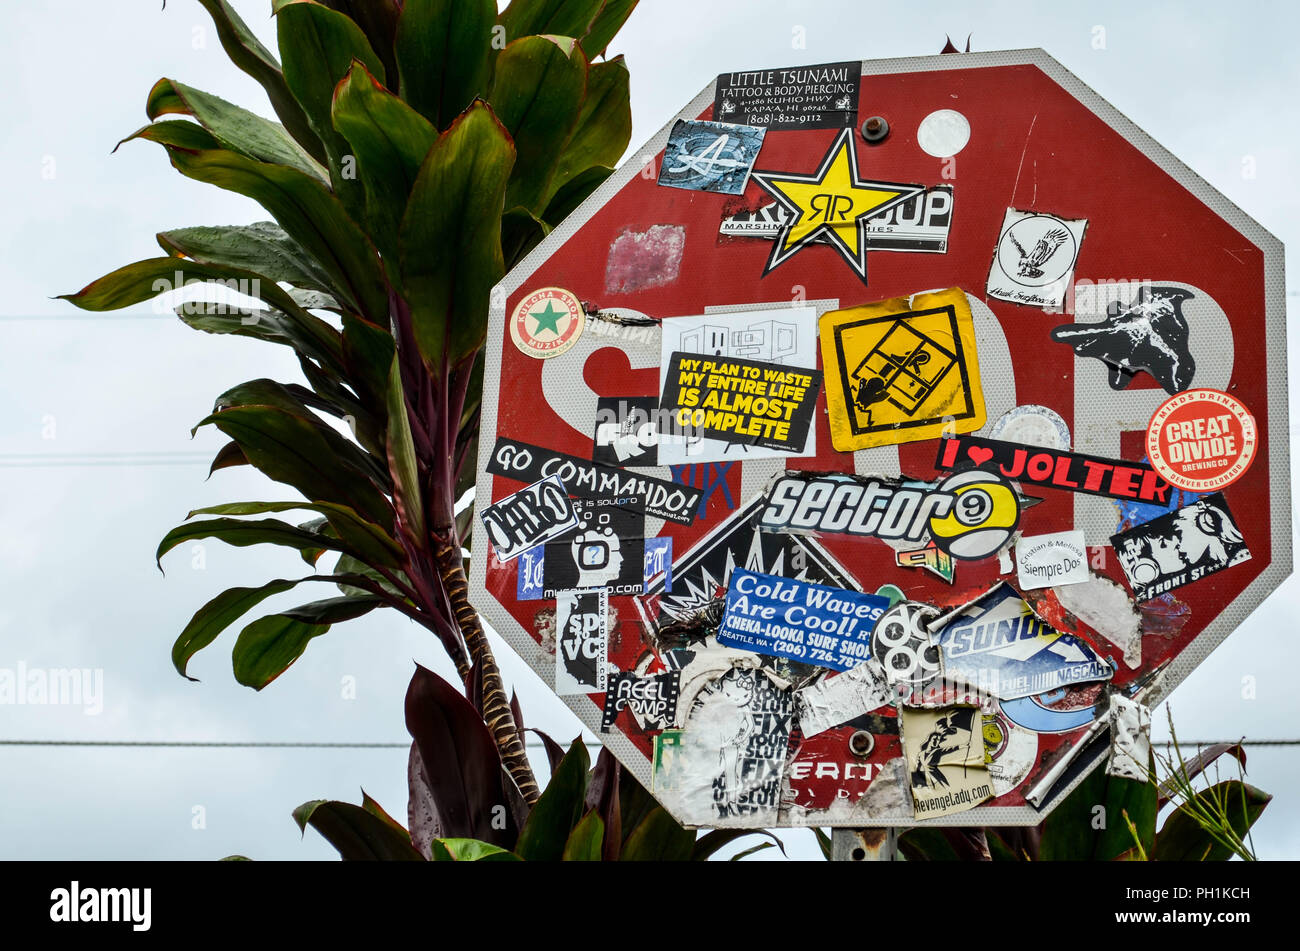 A stop sign in Kauai (Hawaii, USA) obscured with stickers, and surrounded by tropical foliage. Stock Photo